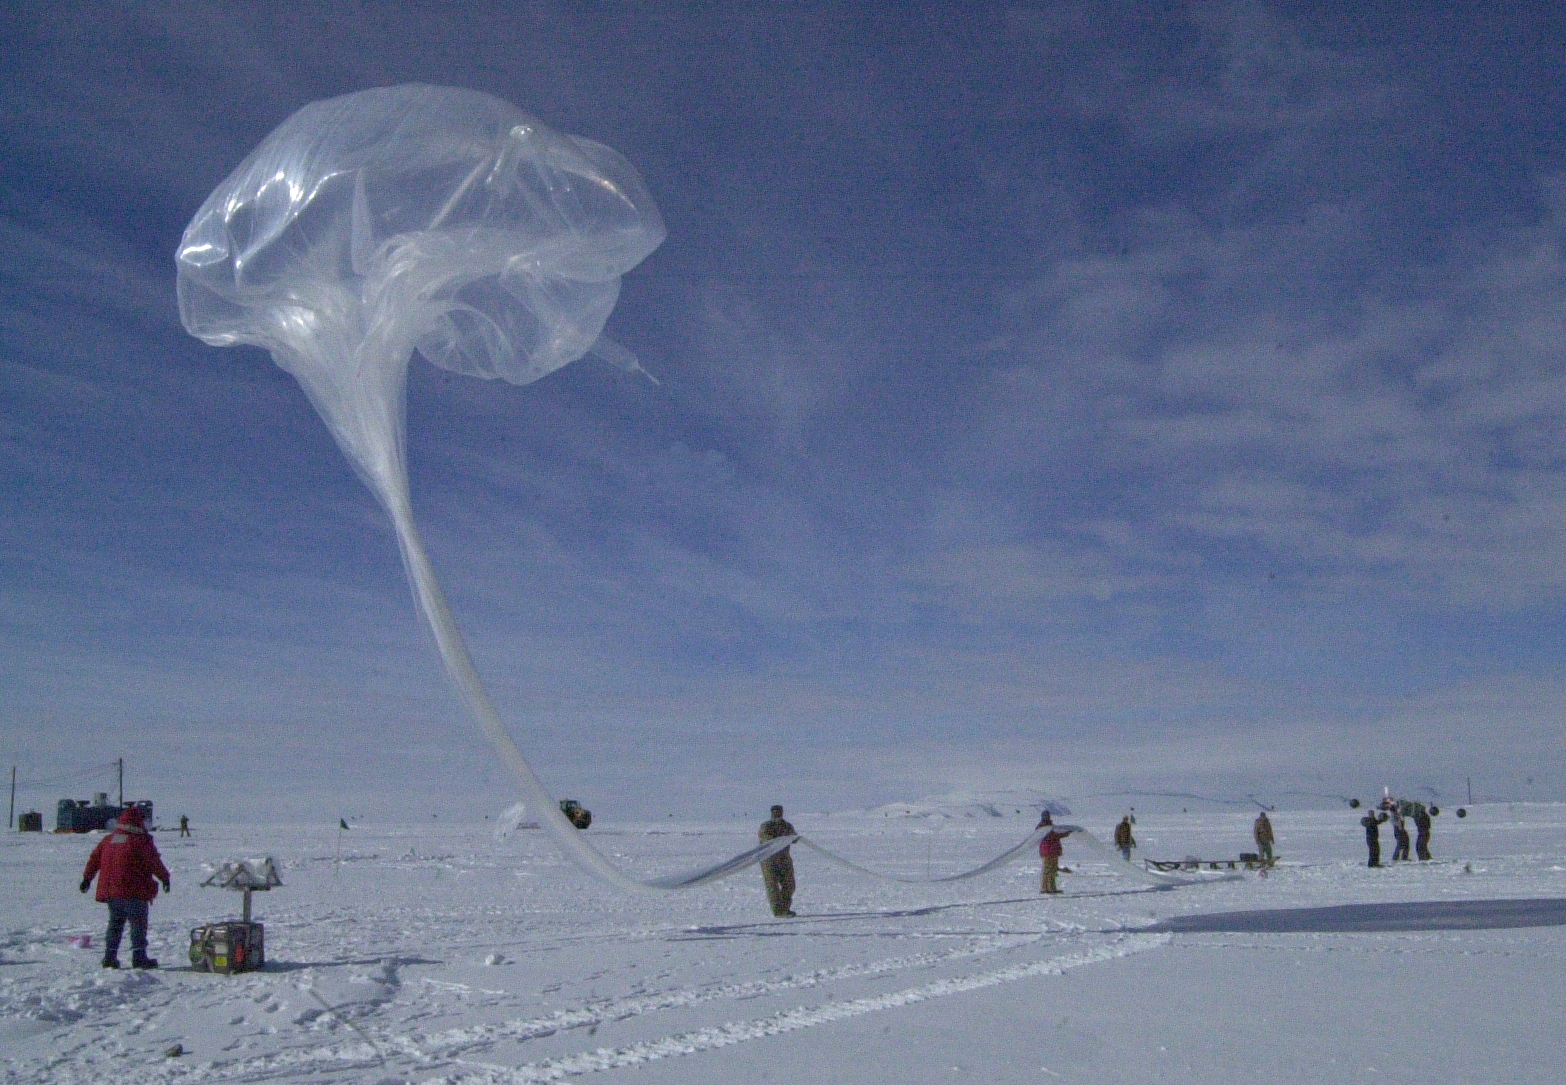 People hold a large balloon on snow.